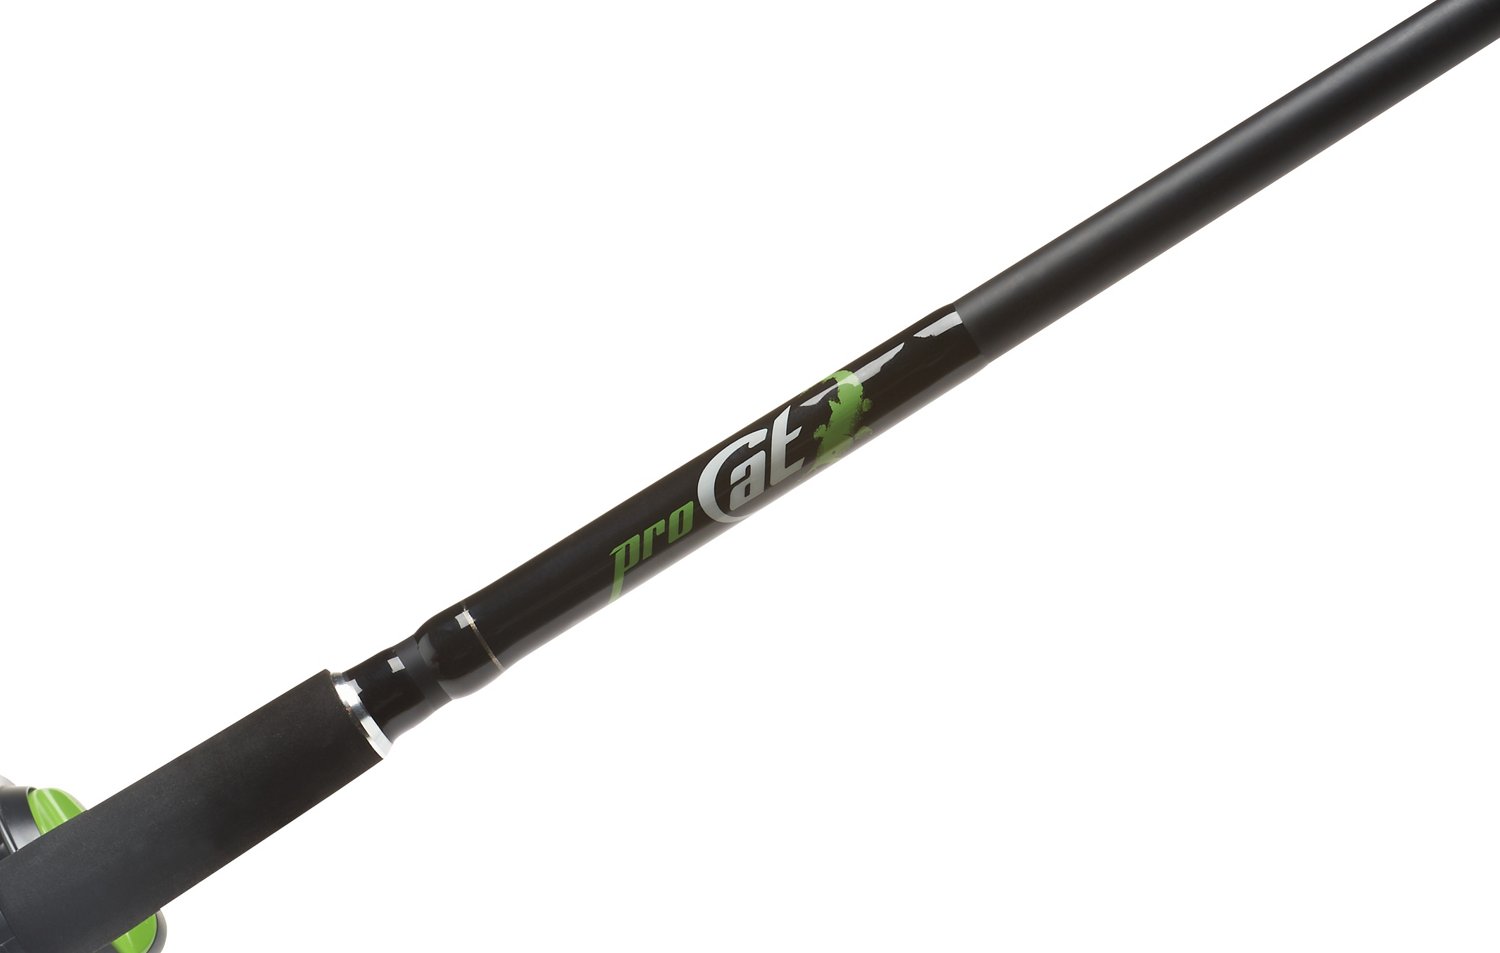 Academy Sports + Outdoors Pro Cat 7 ft Spinning Rod and